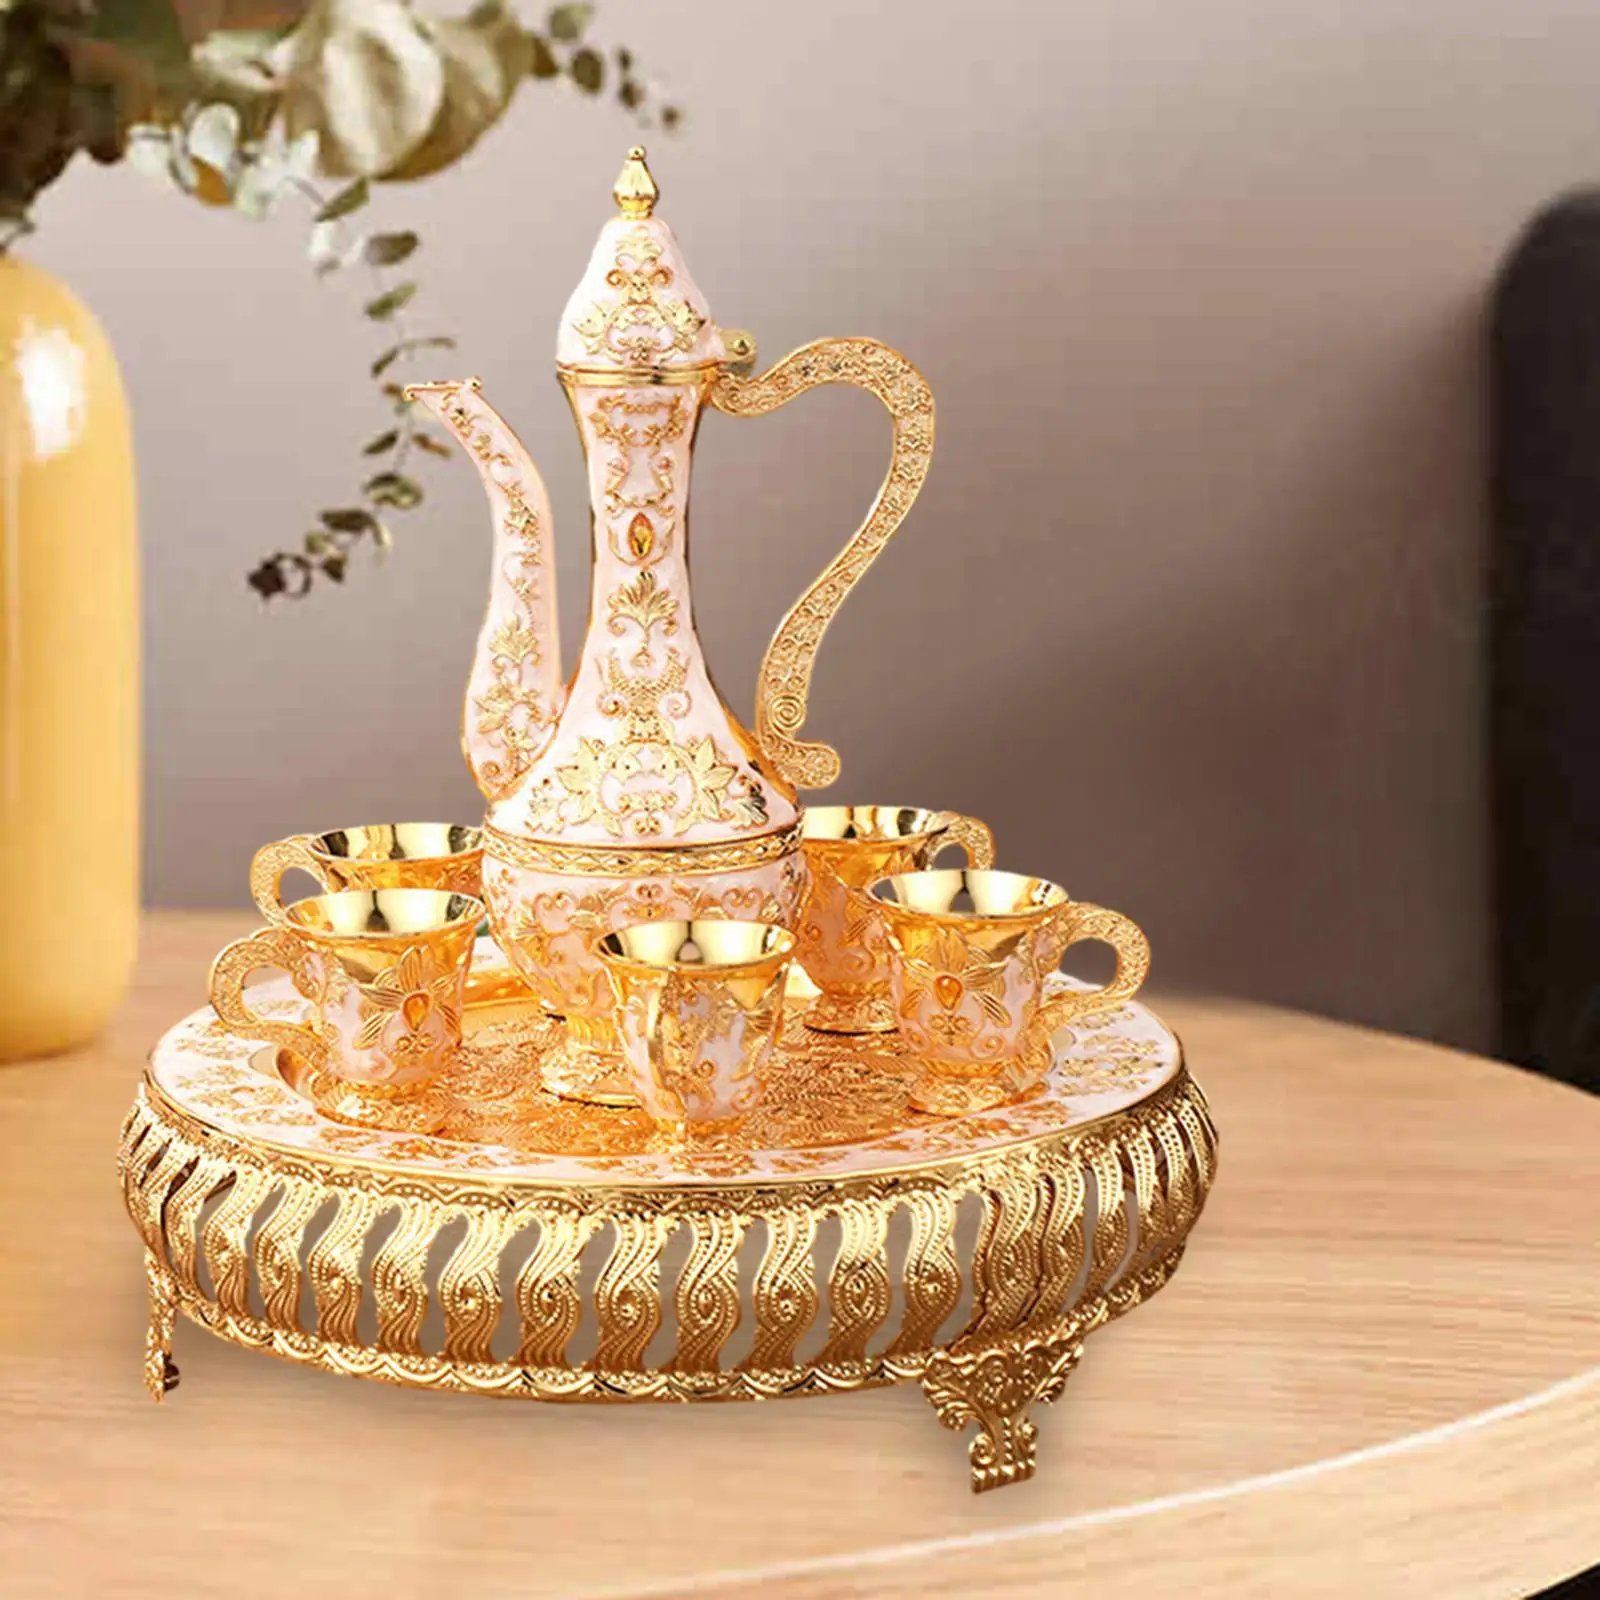 Tea Set with Cups Water Serving Set China Coffee Set for Living Room Home Dining Room Bedroom Decoration